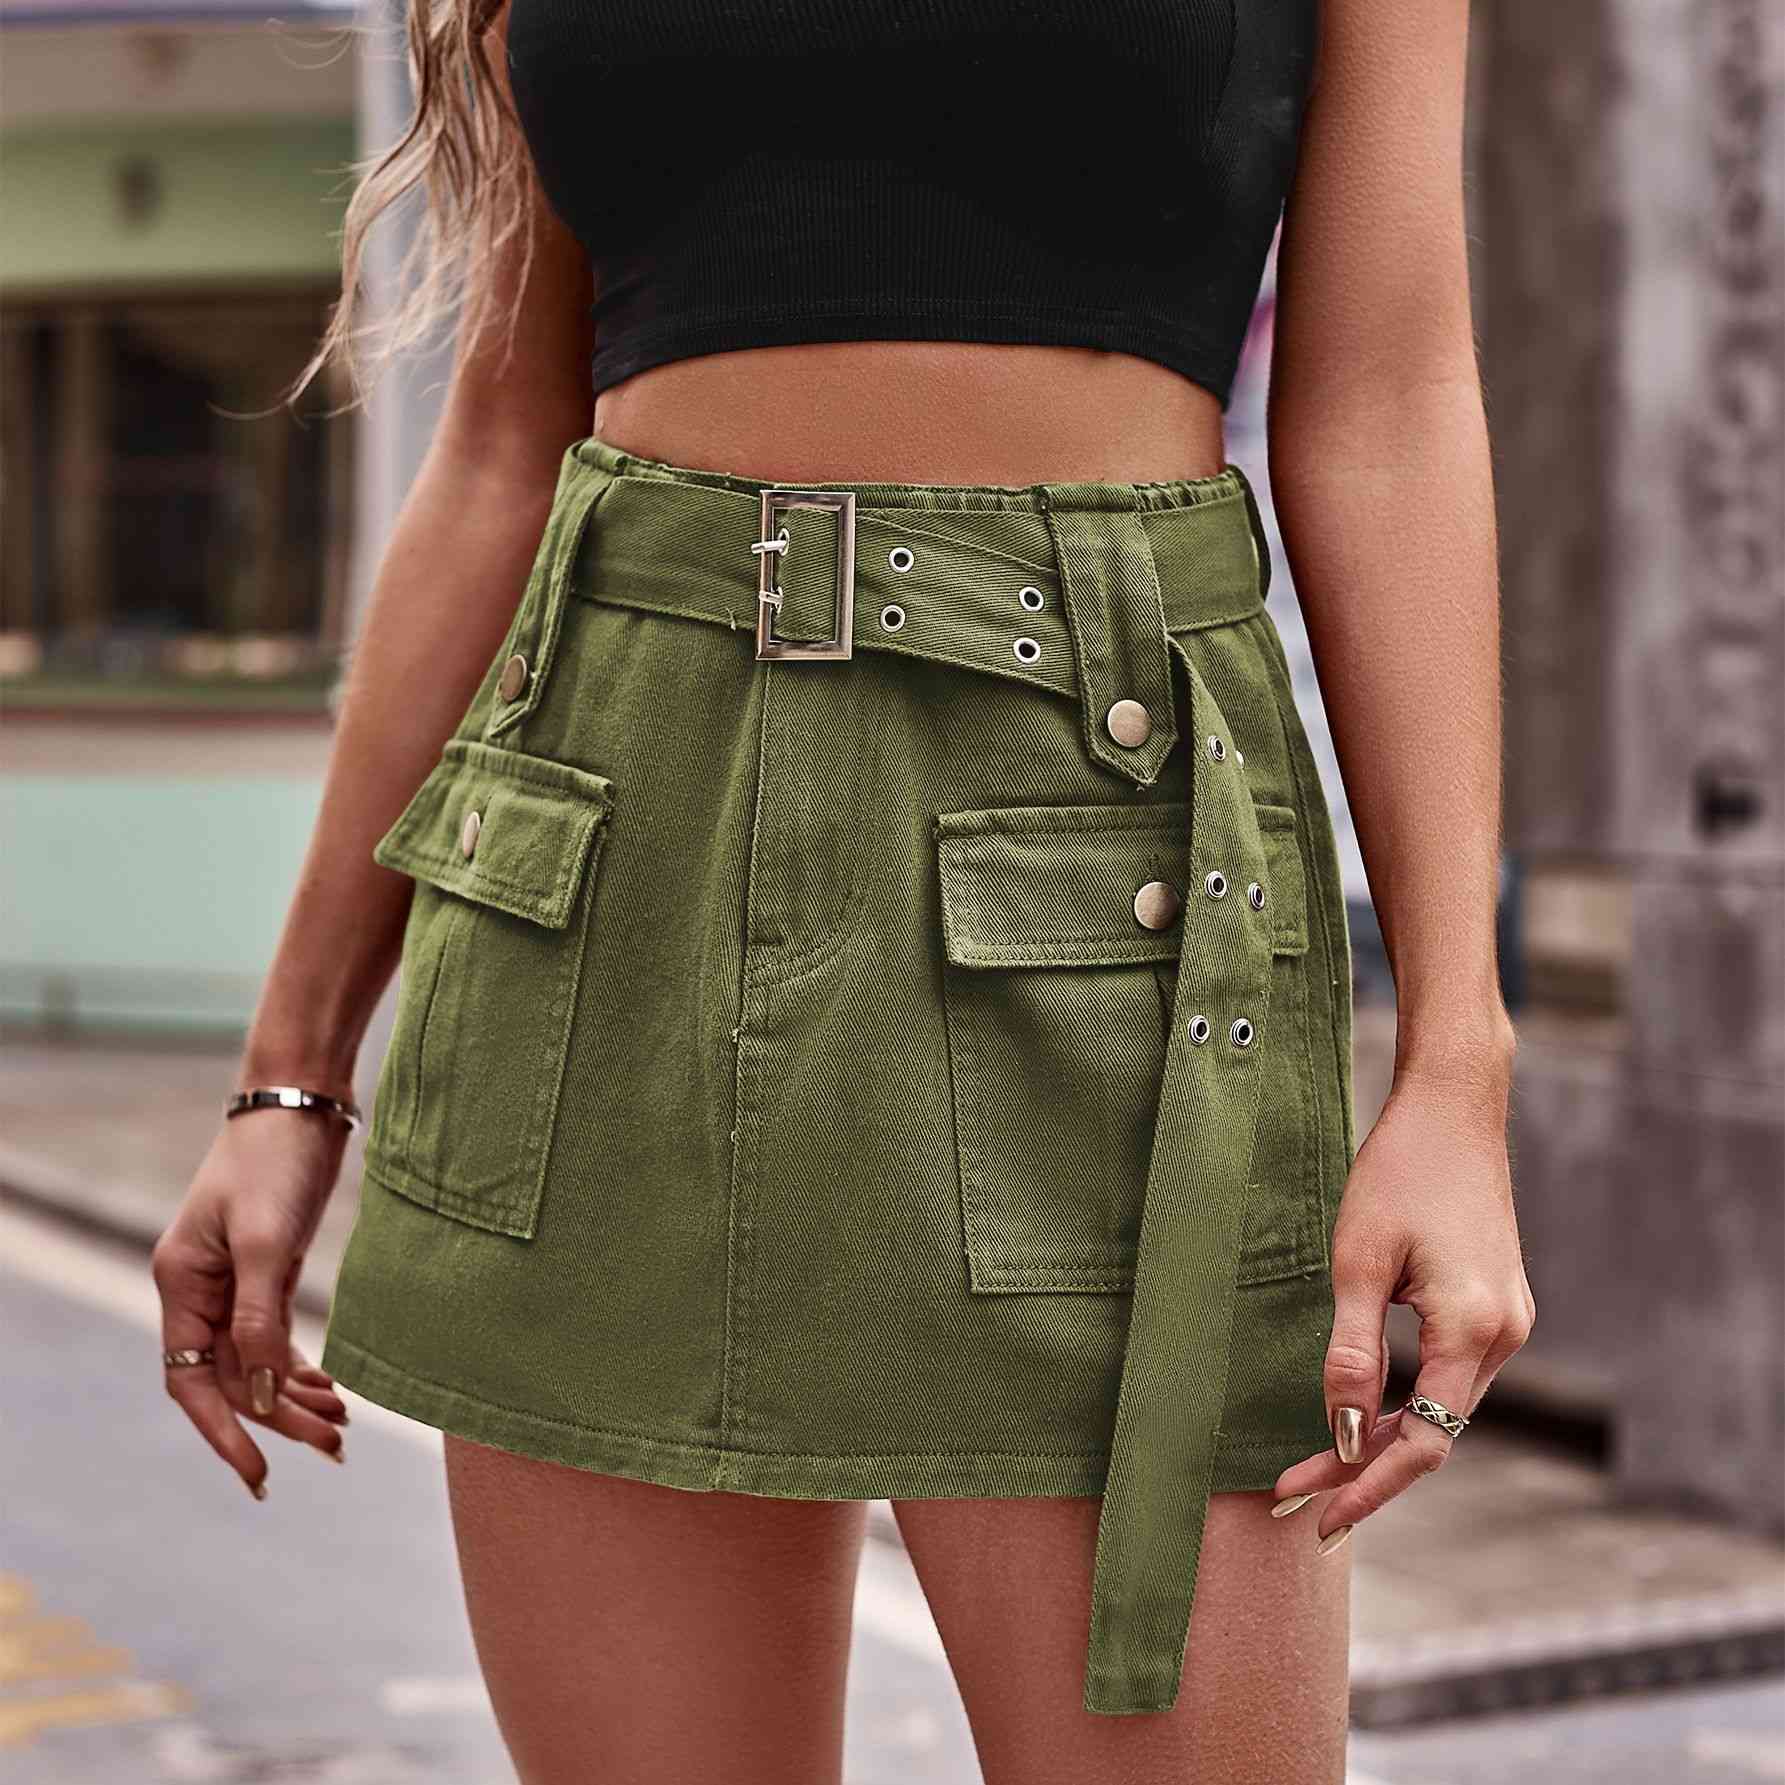 Dim Gray Belted Denim Shorts with Pockets Sentient Beauty Fashions Apparel &amp; Accessories